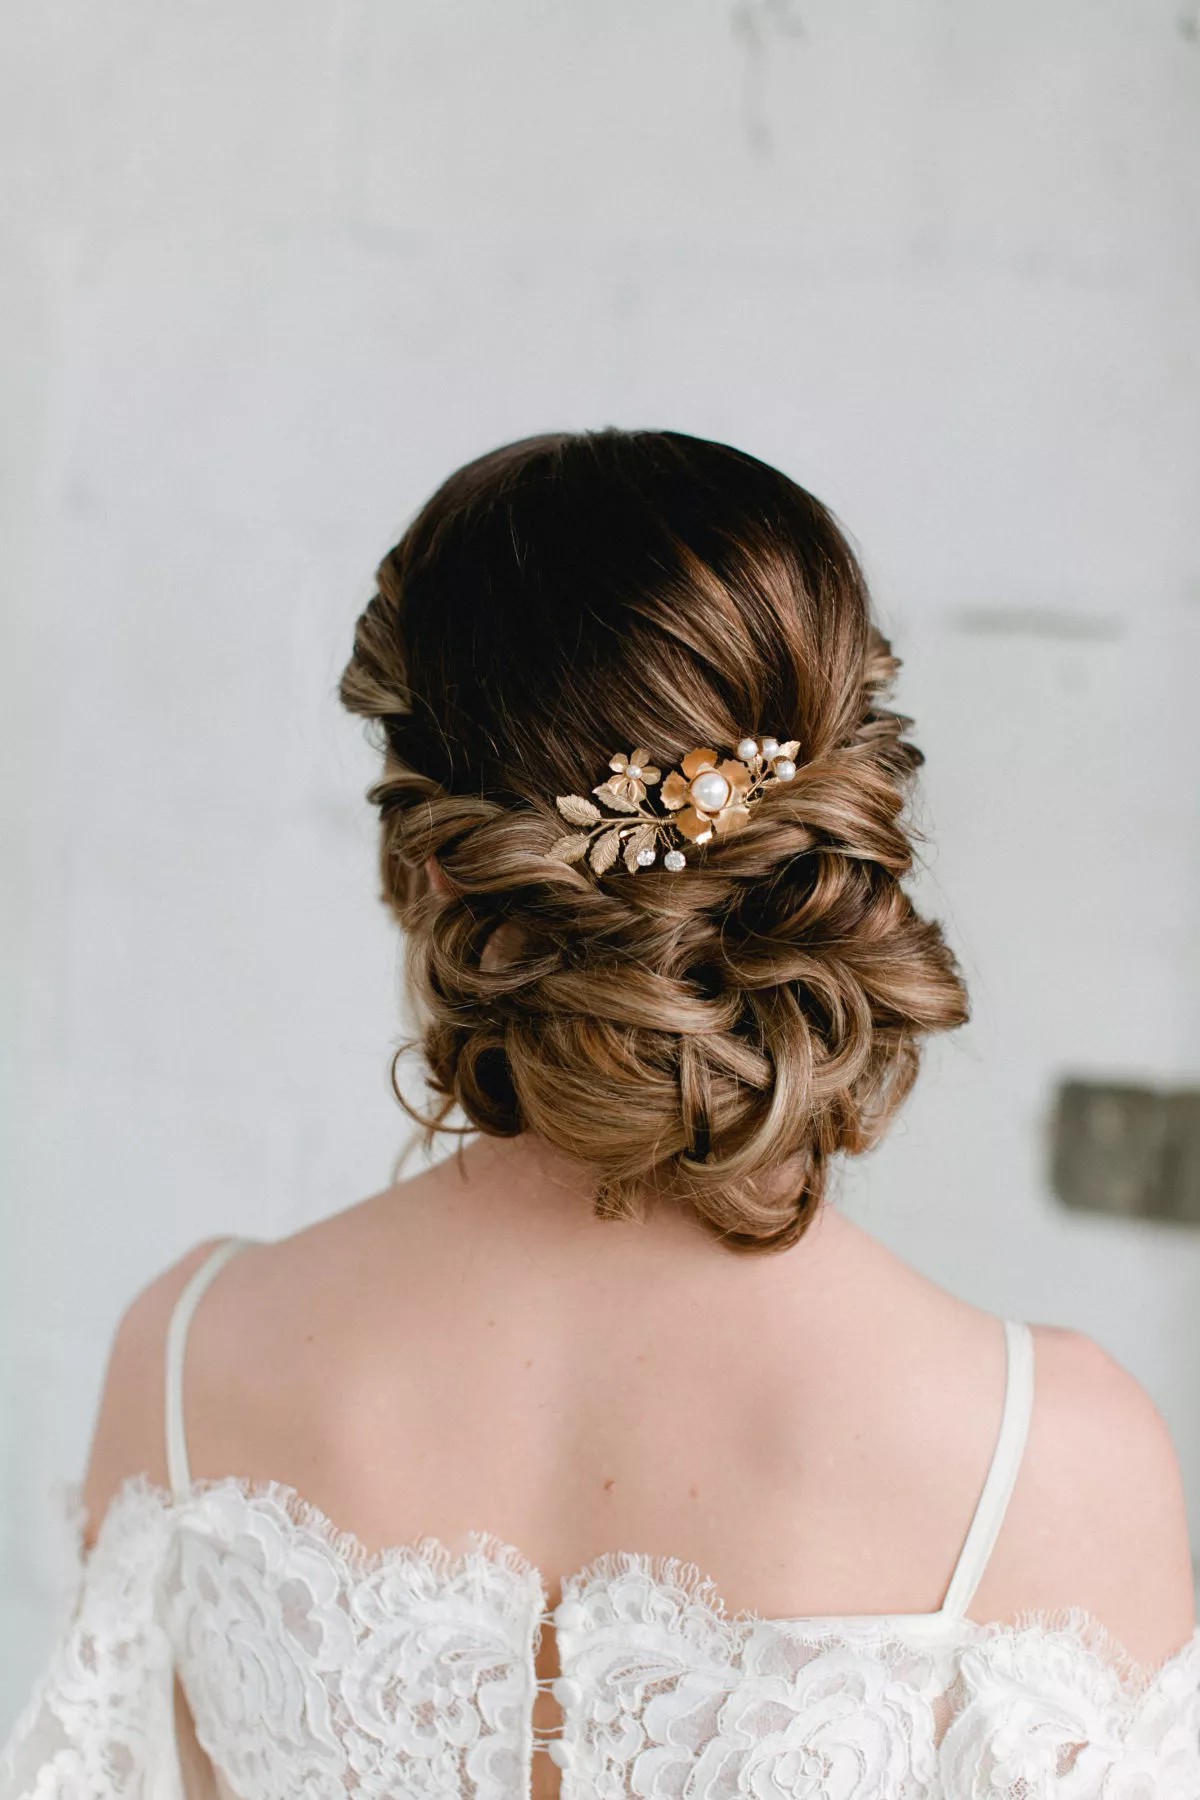 From Milkmaid Braids To Old Hollywood Waves: Here Are 35 Beautiful Wedding Hairstyles Ideas For Brides With Long Hair